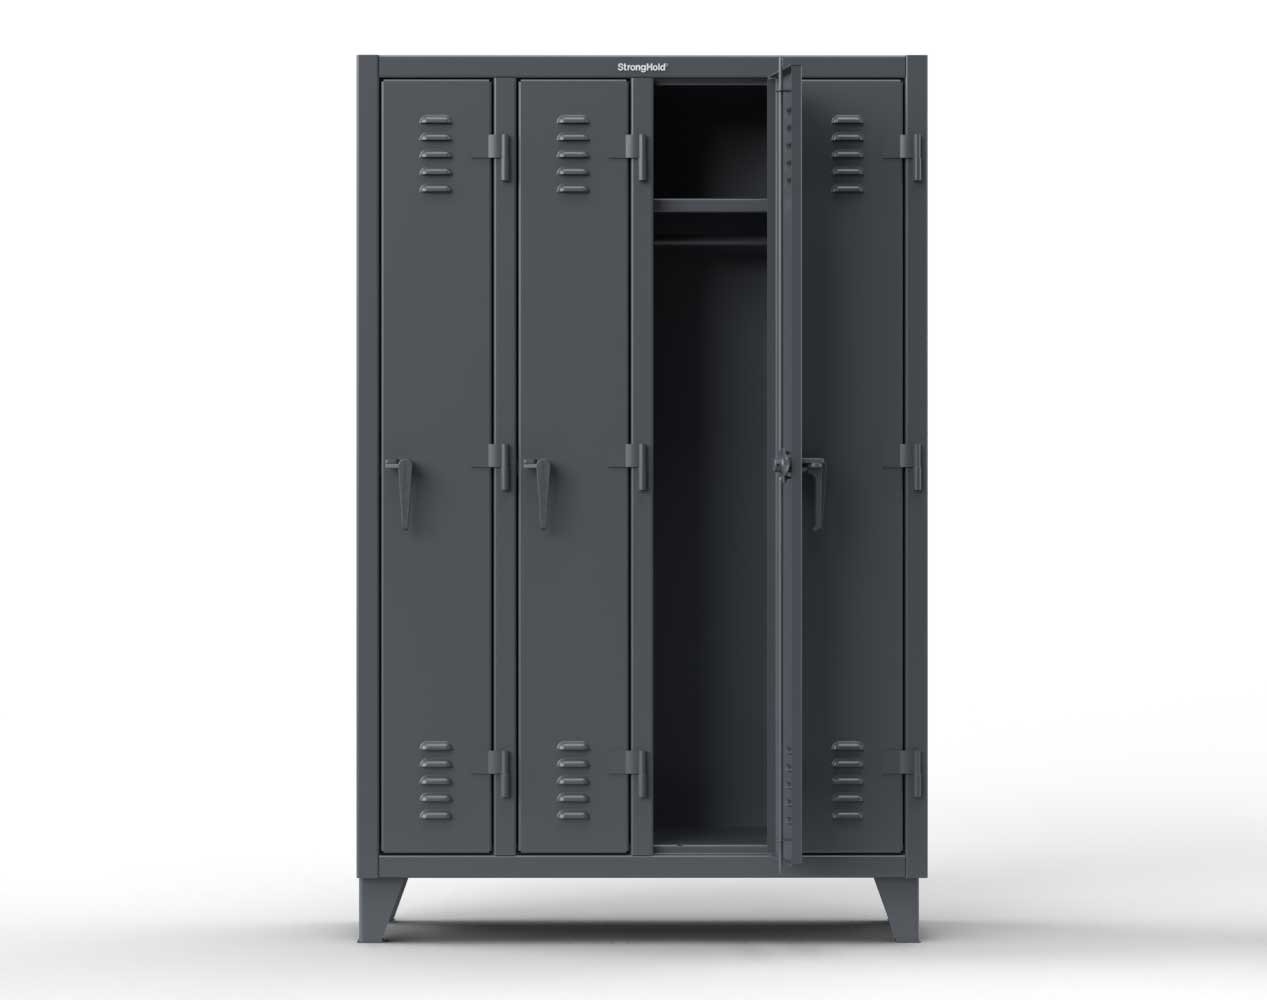 Extreme Duty 12 GA Single-Tier Locker with 8 Compartments, Louvered Doors, Wardrobe Rod - 98 in. W x 18in. D x 78 in. H